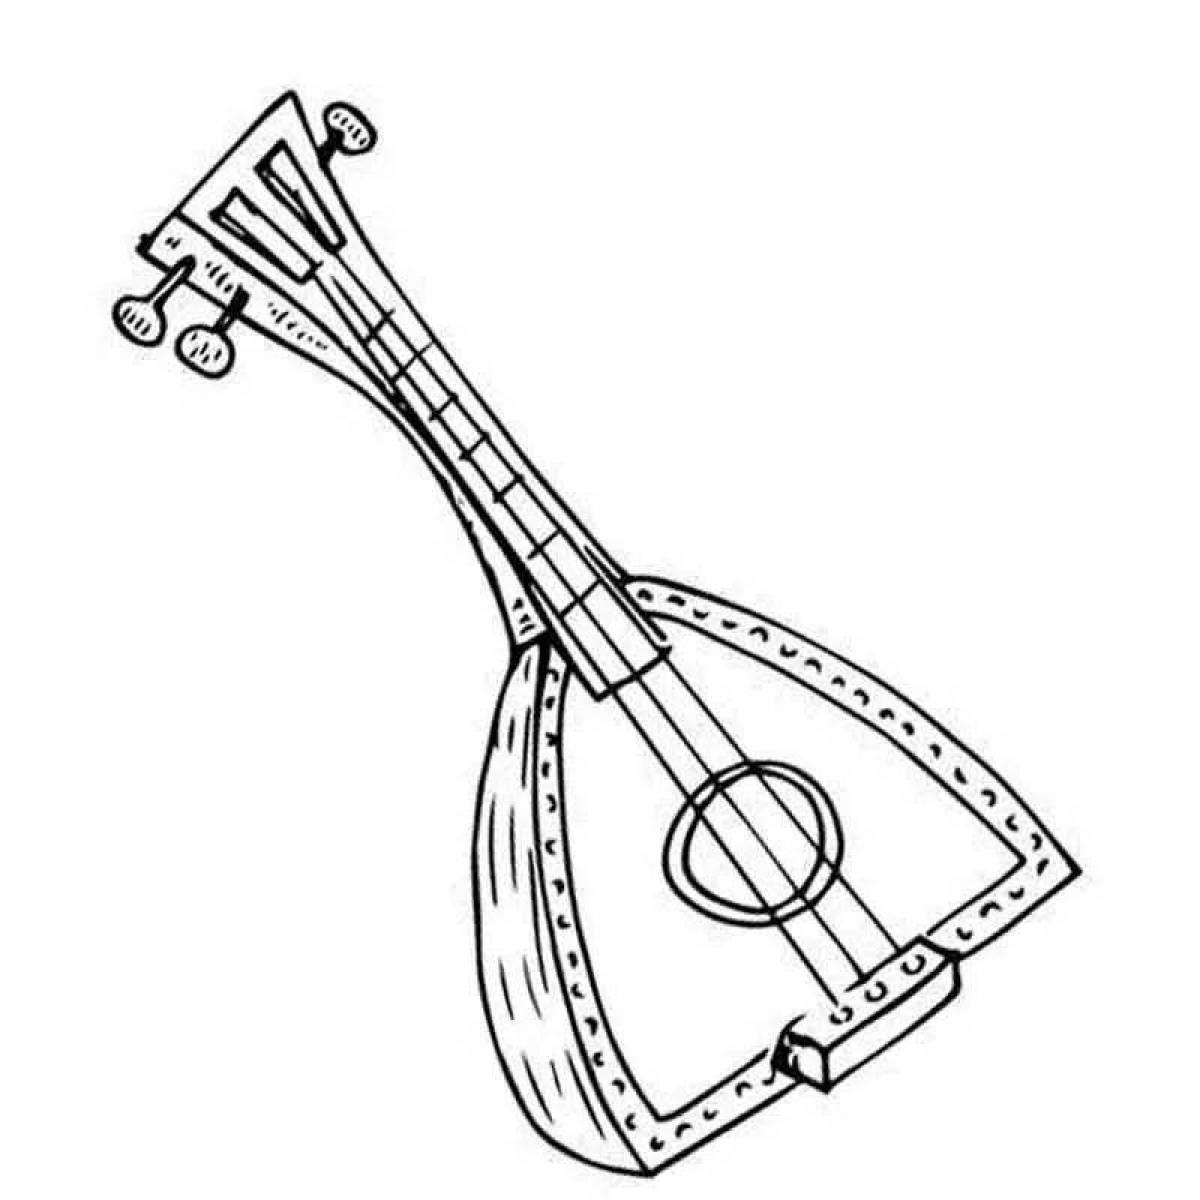 Coloring page inviting Russian folk musical instruments